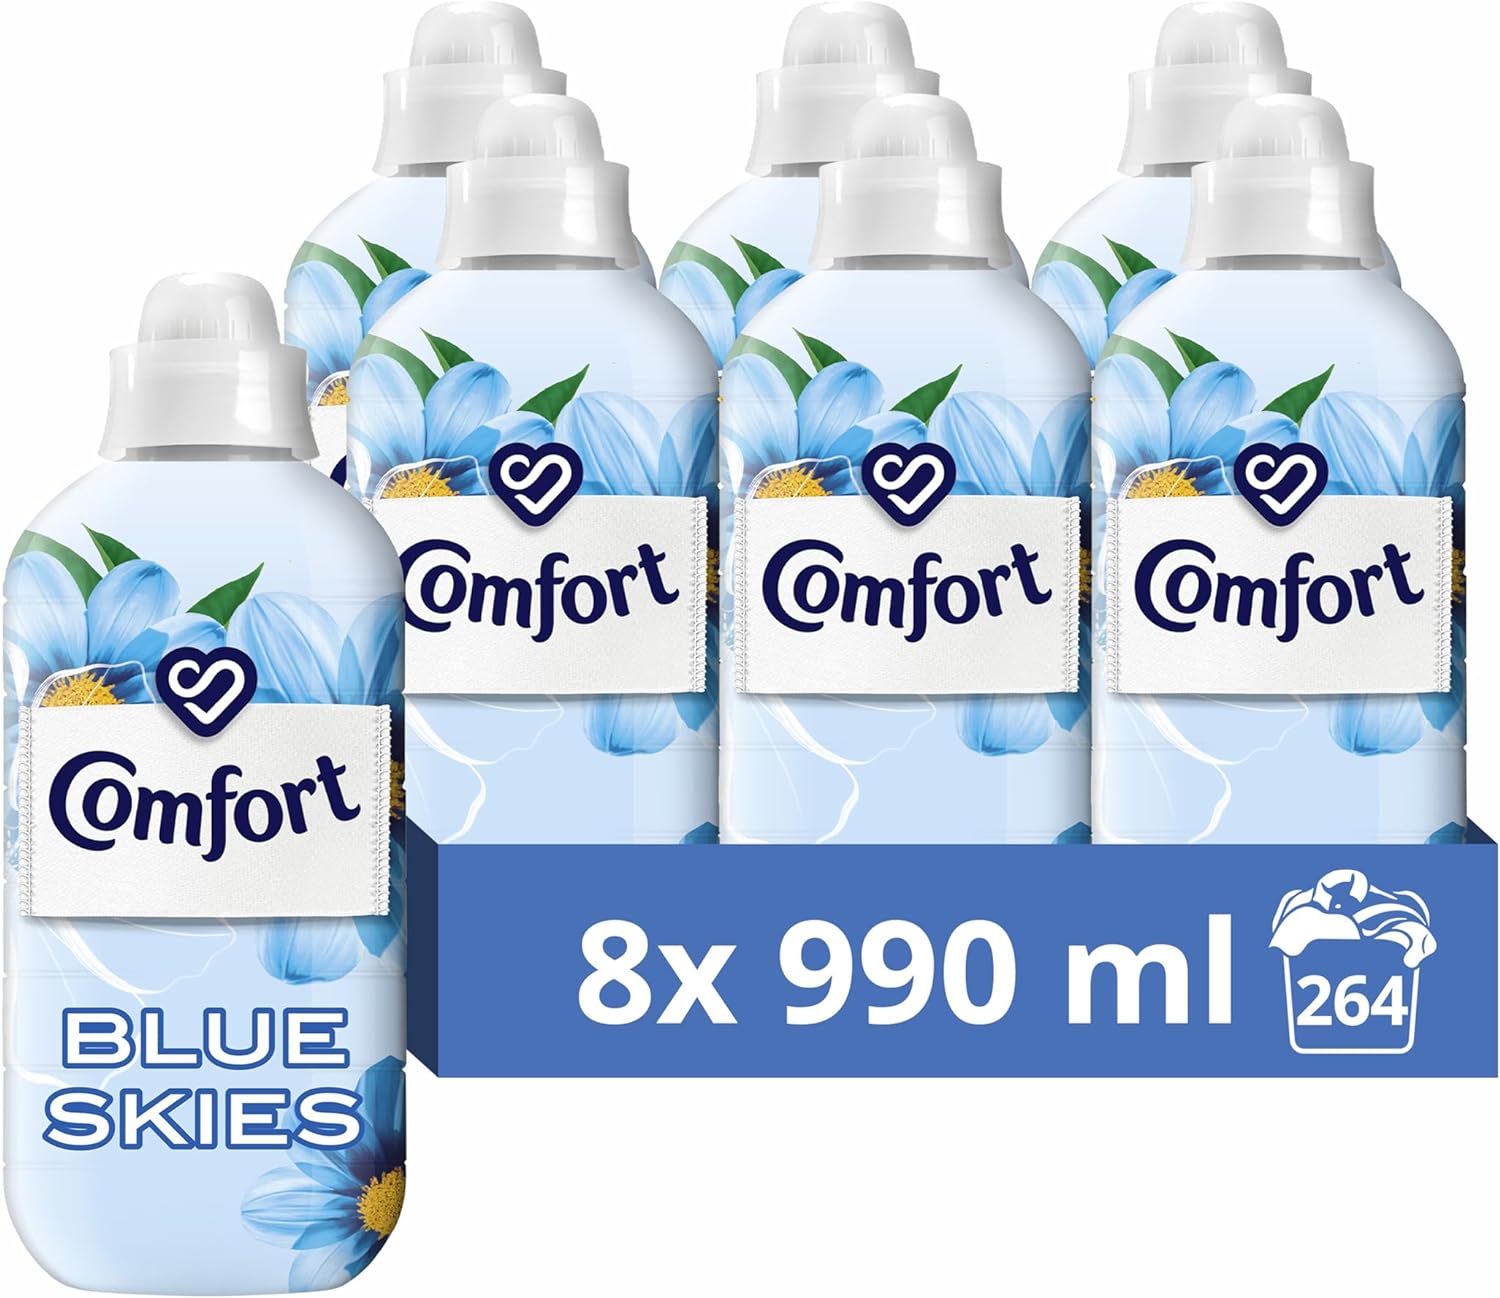 Comfort Fabric Conditioner Blue Skies 33 Wash - 990ml - Pack of 8